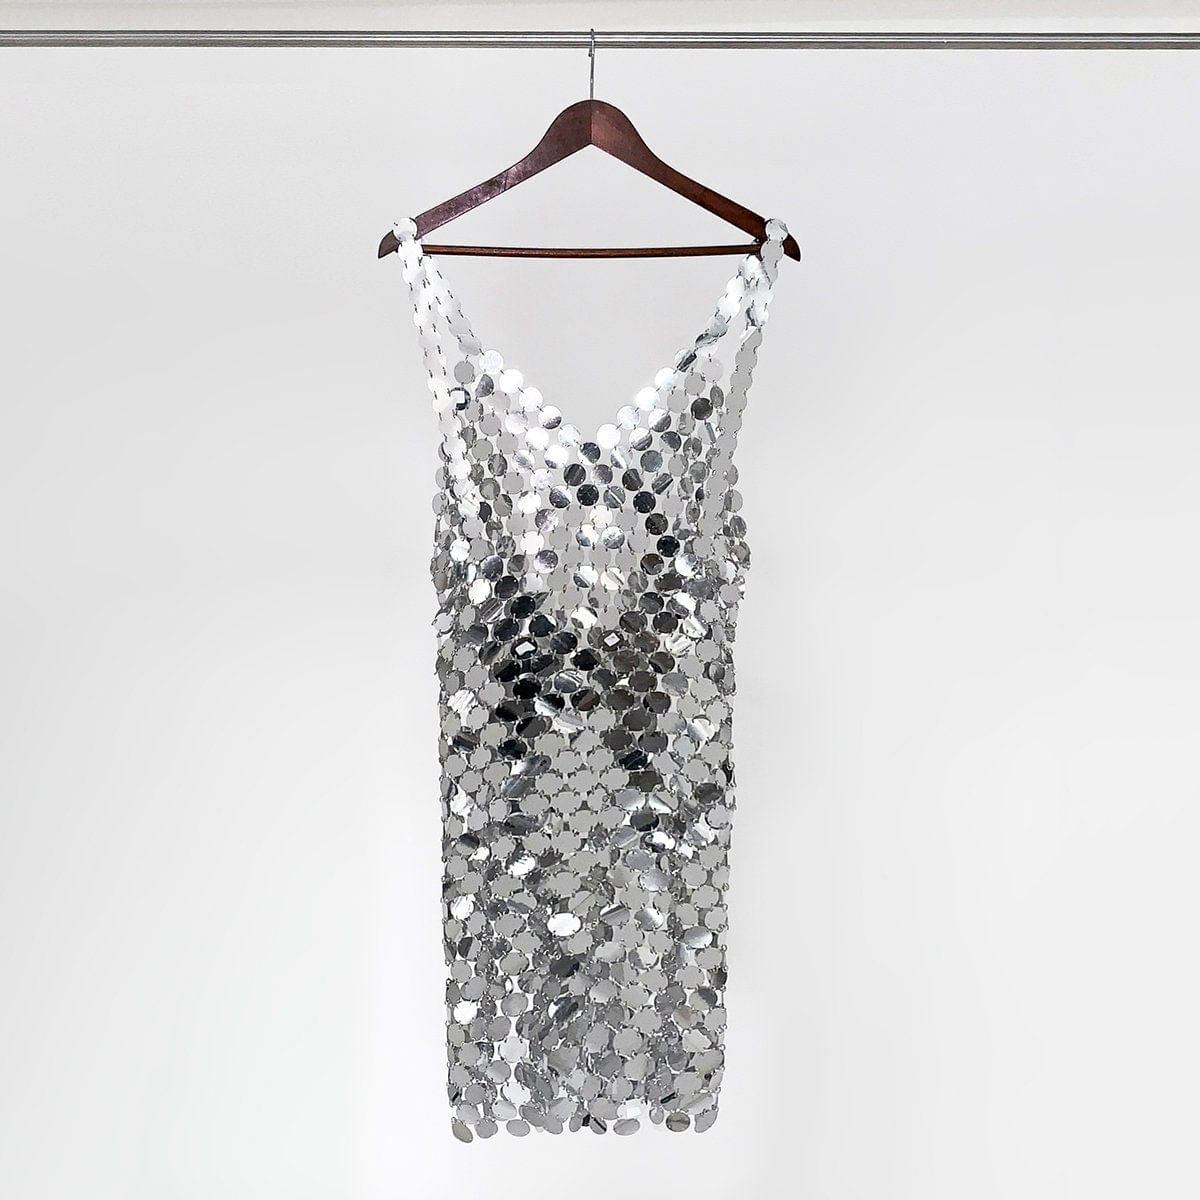 Handmade squamous Sequins Patchwork Nightclub Party Dress - Sequin